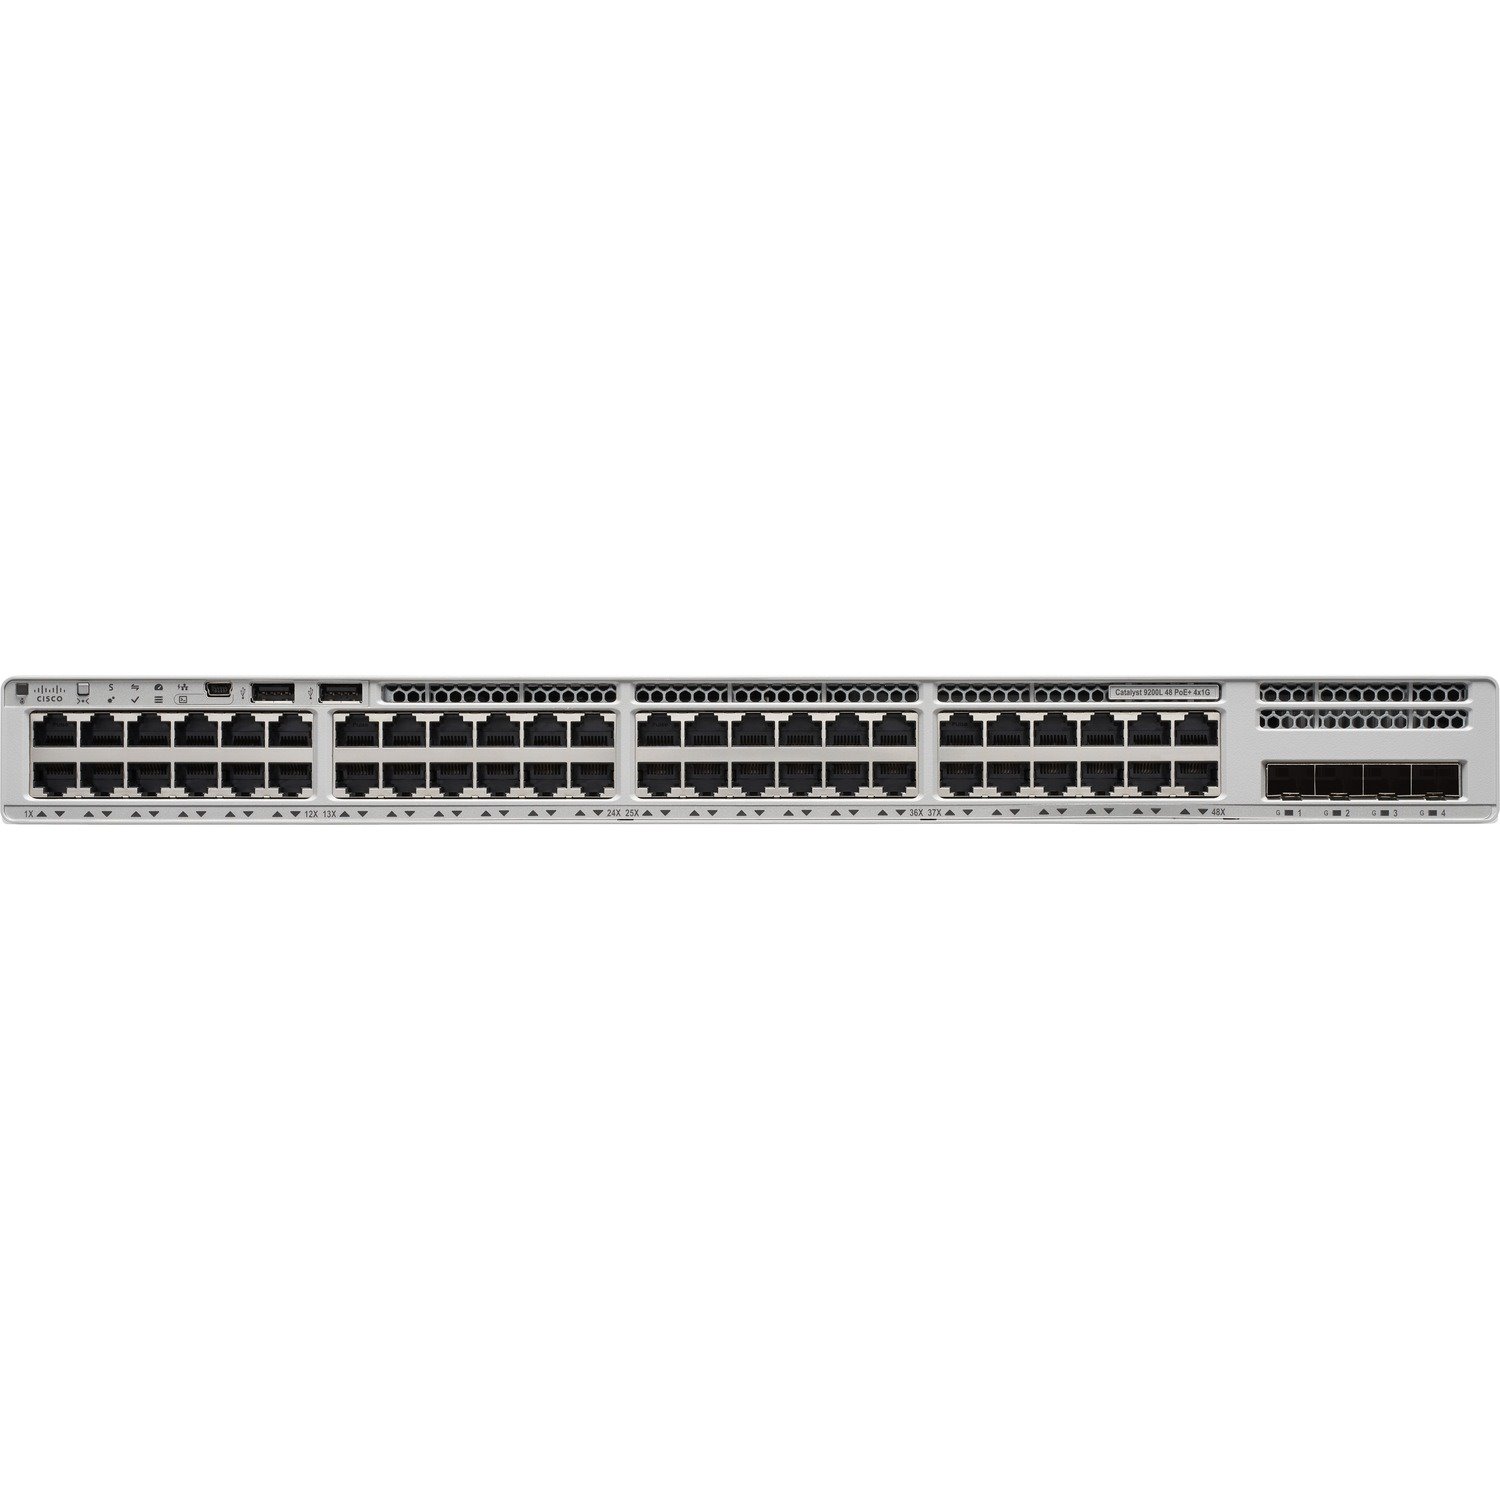 Cisco Catalyst 9200 C9200L-48P-4G 48 Ports Manageable Layer 3 Switch